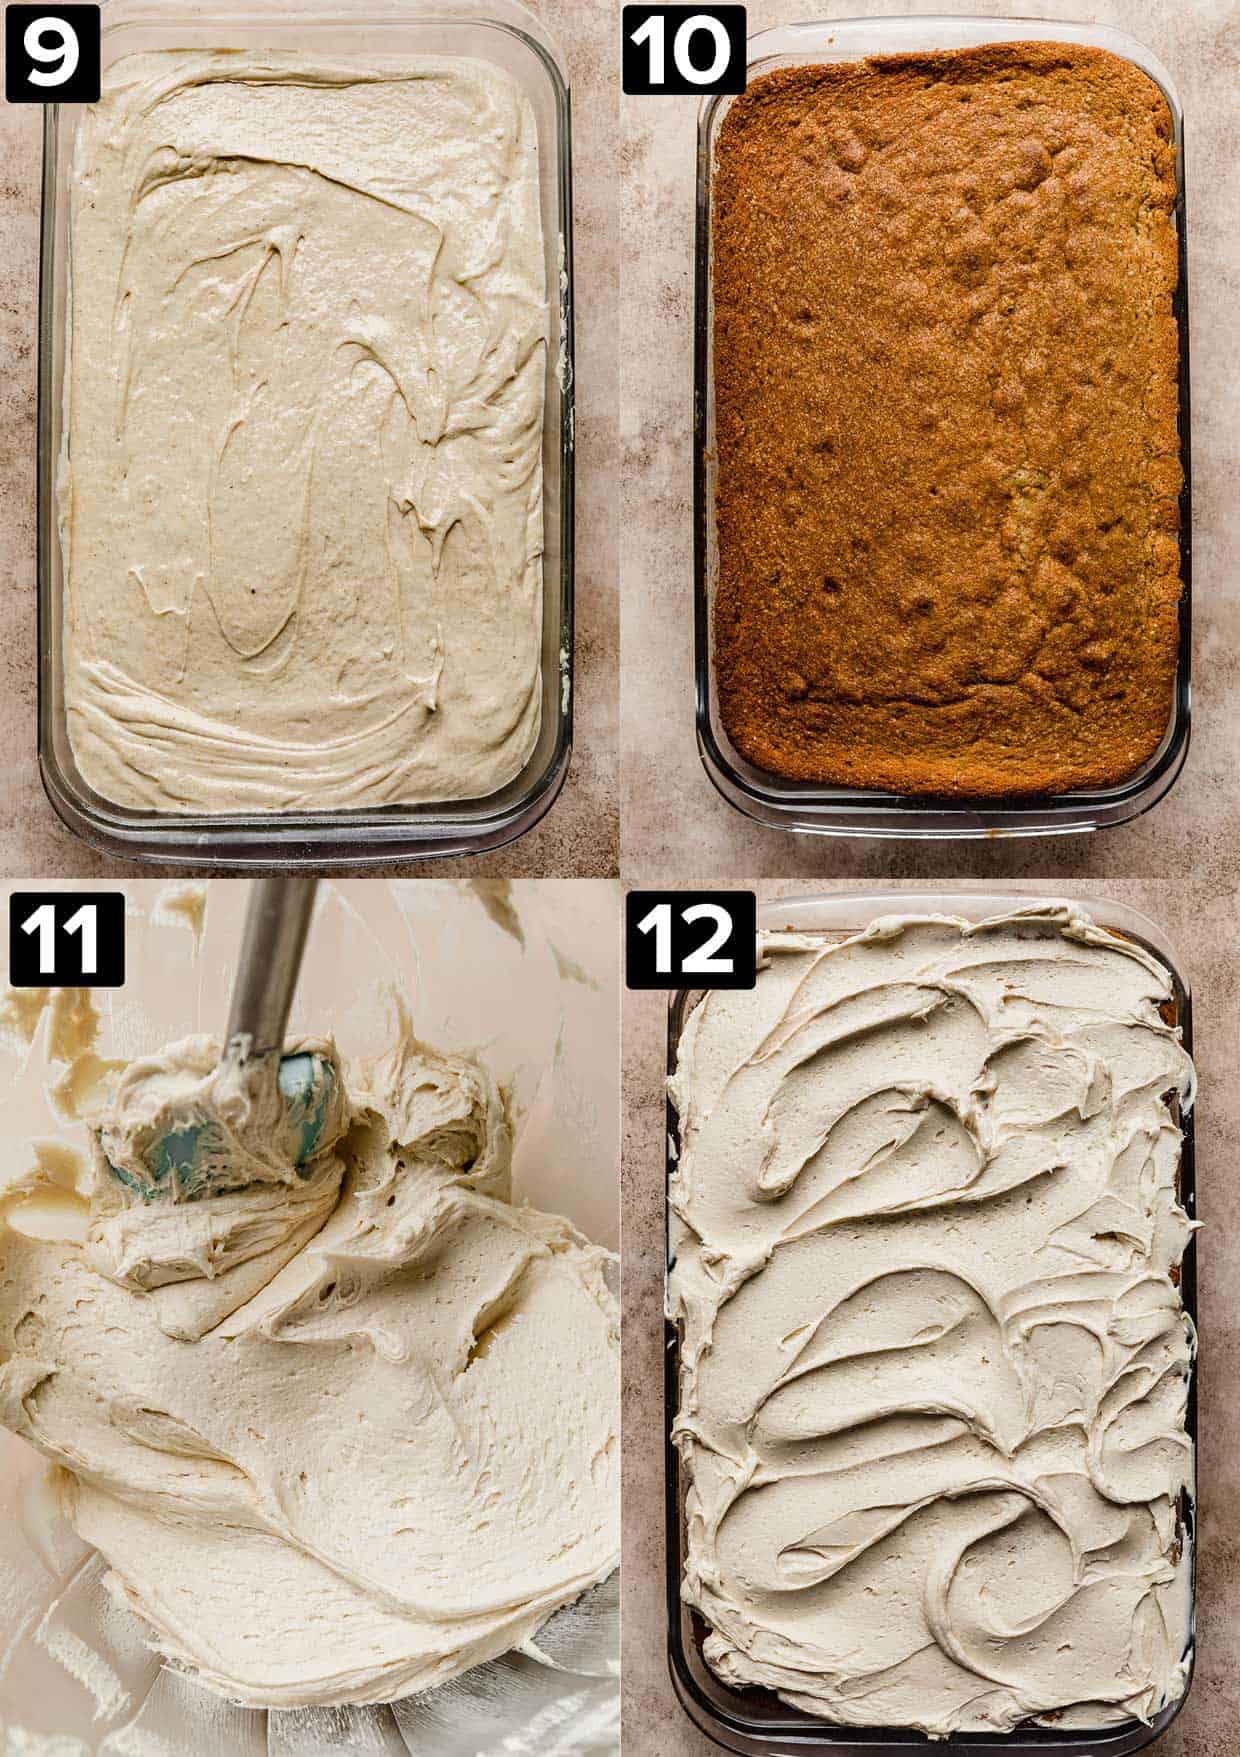 Four photos with the top two photos with Butterscotch Cake batter in a baking dish, the right photo with baked Butterscotch Cake, bottom left photo is Butterscotch frosting, and bottom right has Butterscotch frosting over Butterscotch Cake.